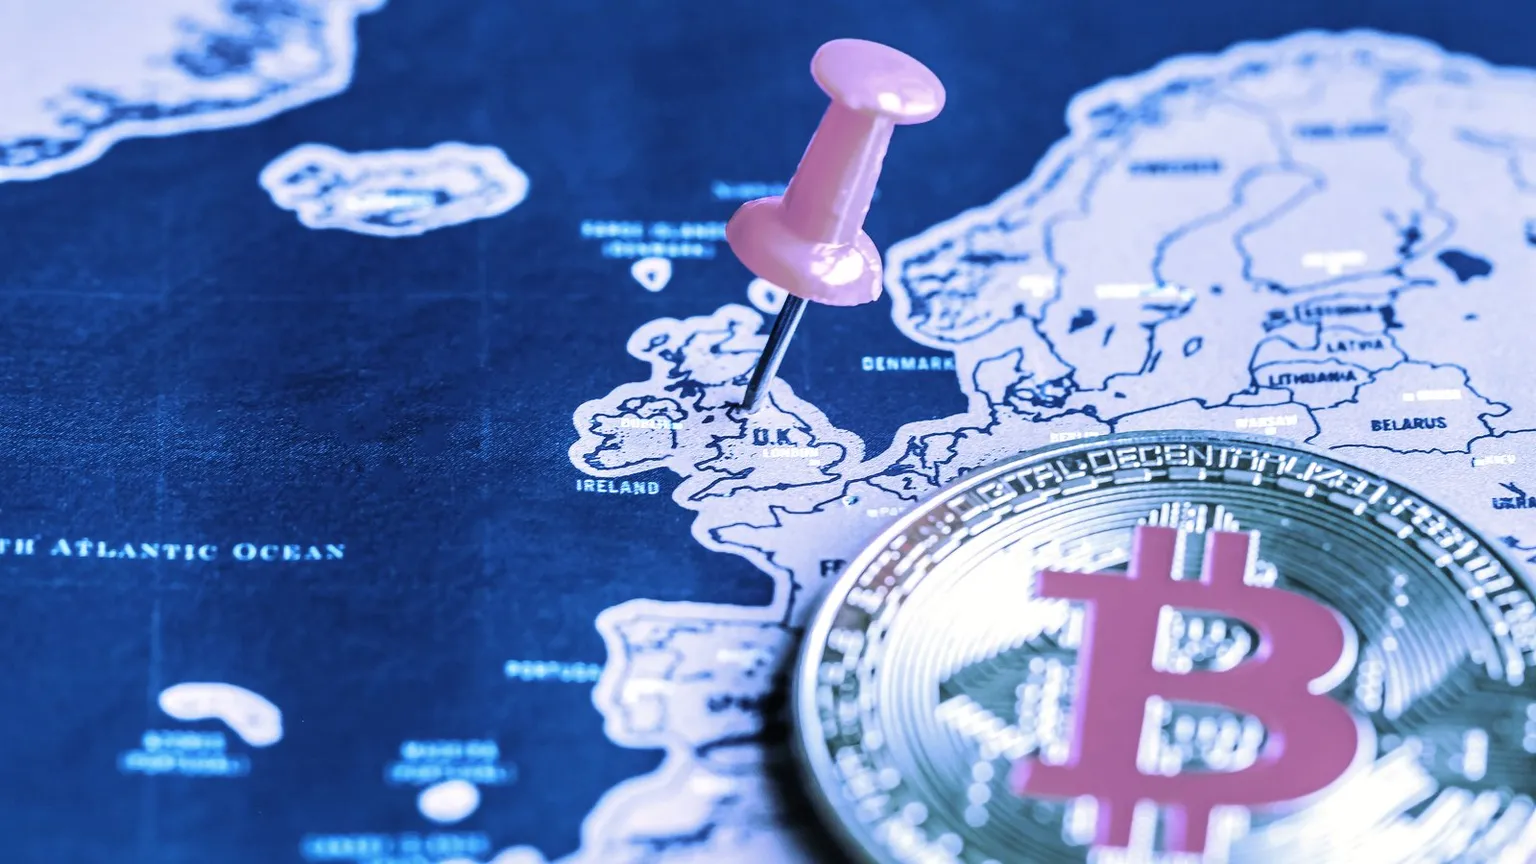 Cryptocurrencies in the United Kingdom have come under fire from regulators. Image: Shutterstock